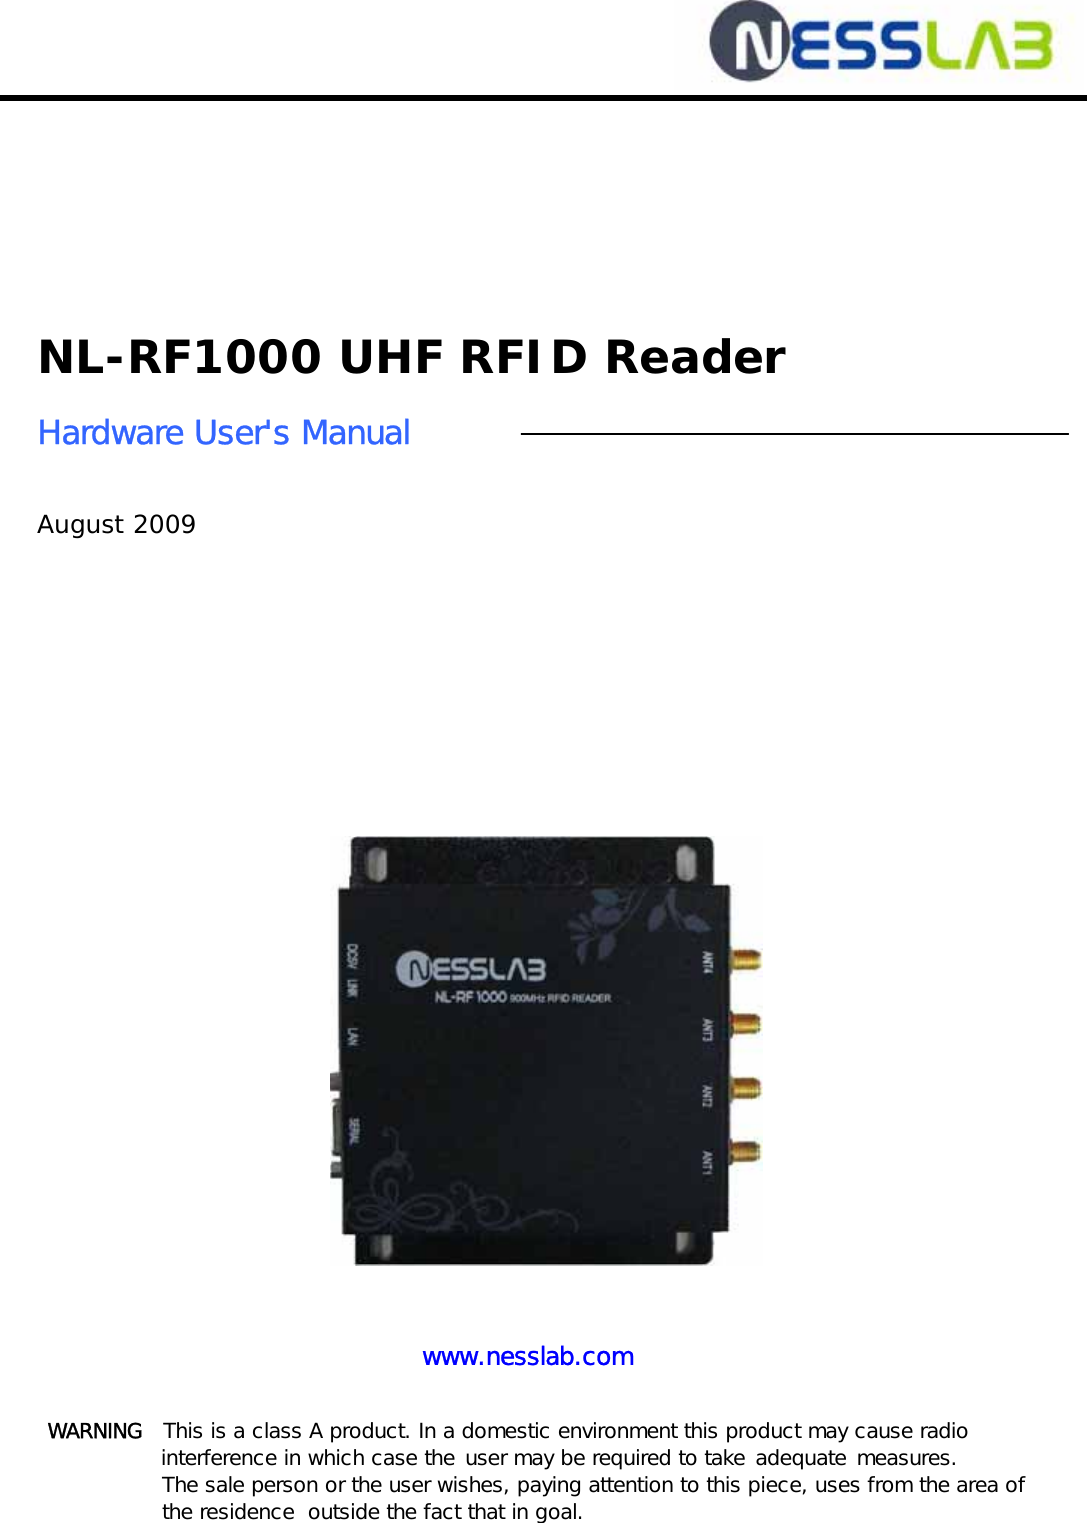            NL-RF1000 UHF RFID Reader  Hardware User&apos;s Manual   August 2009         WARNING   This is a class A product. In a domestic environment this product may cause radio interference in which case the user may be required to take adequate measures. The sale person or the user wishes, paying attention to this piece, uses from the area of the residence  outside the fact that in goal. www.nesslab.com 